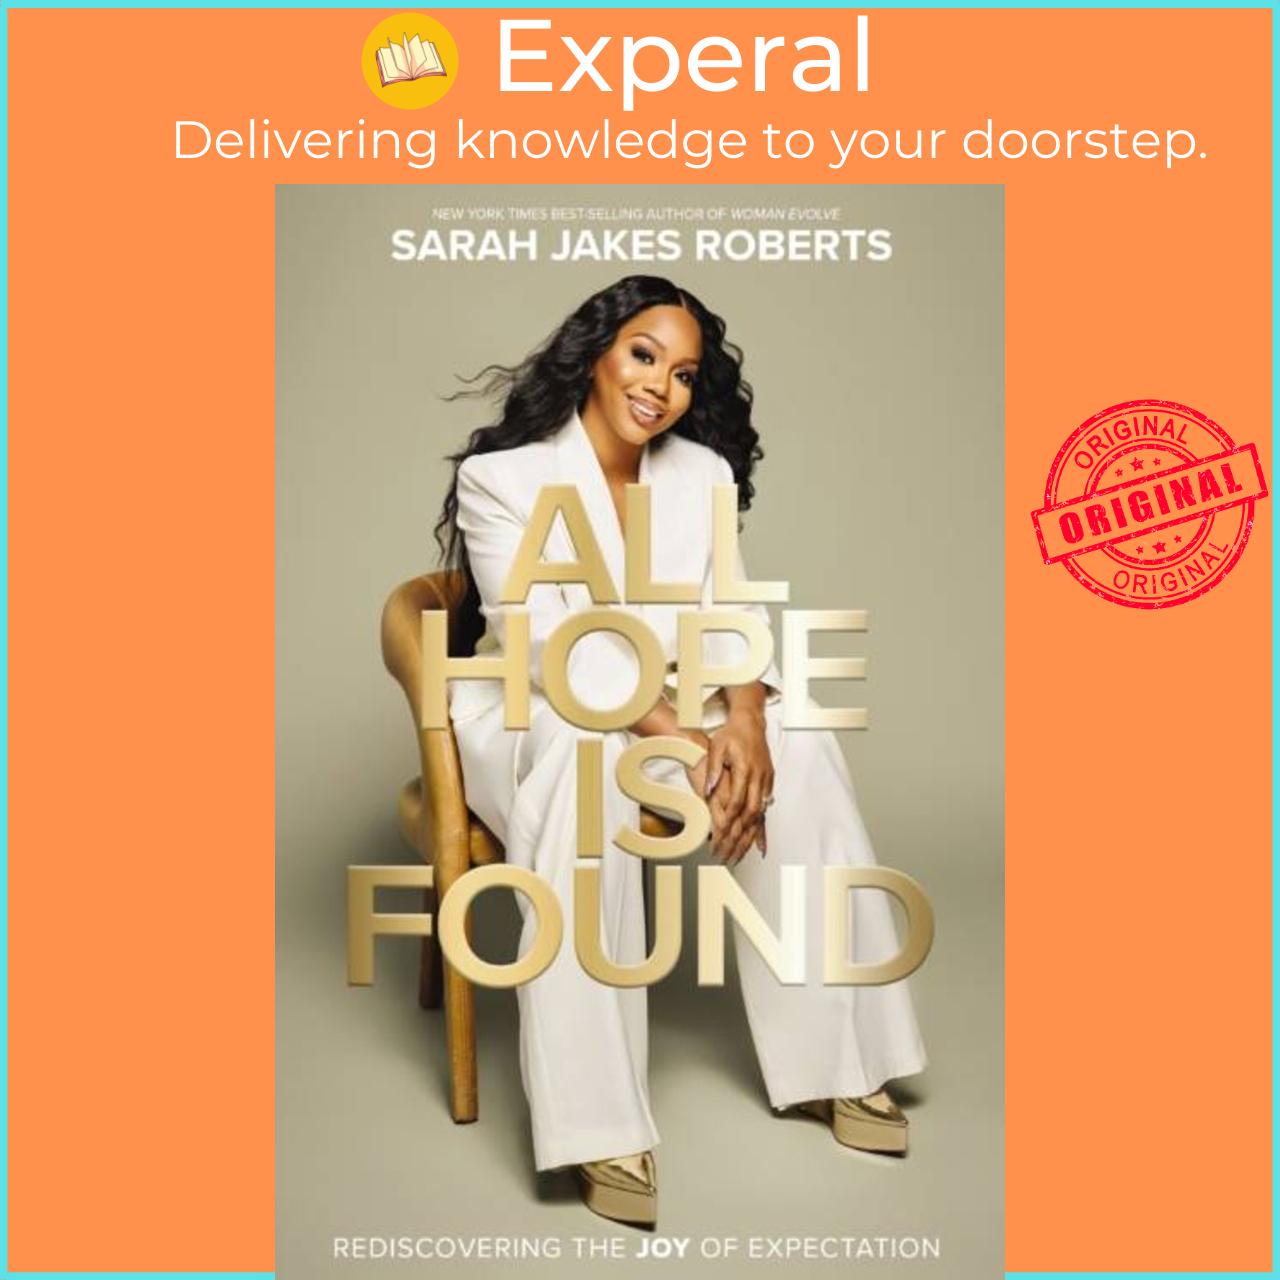 Sách - All Hope is Found - Rediscovering the Joy of Expectation by Sarah Jakes Roberts (UK edition, hardcover)